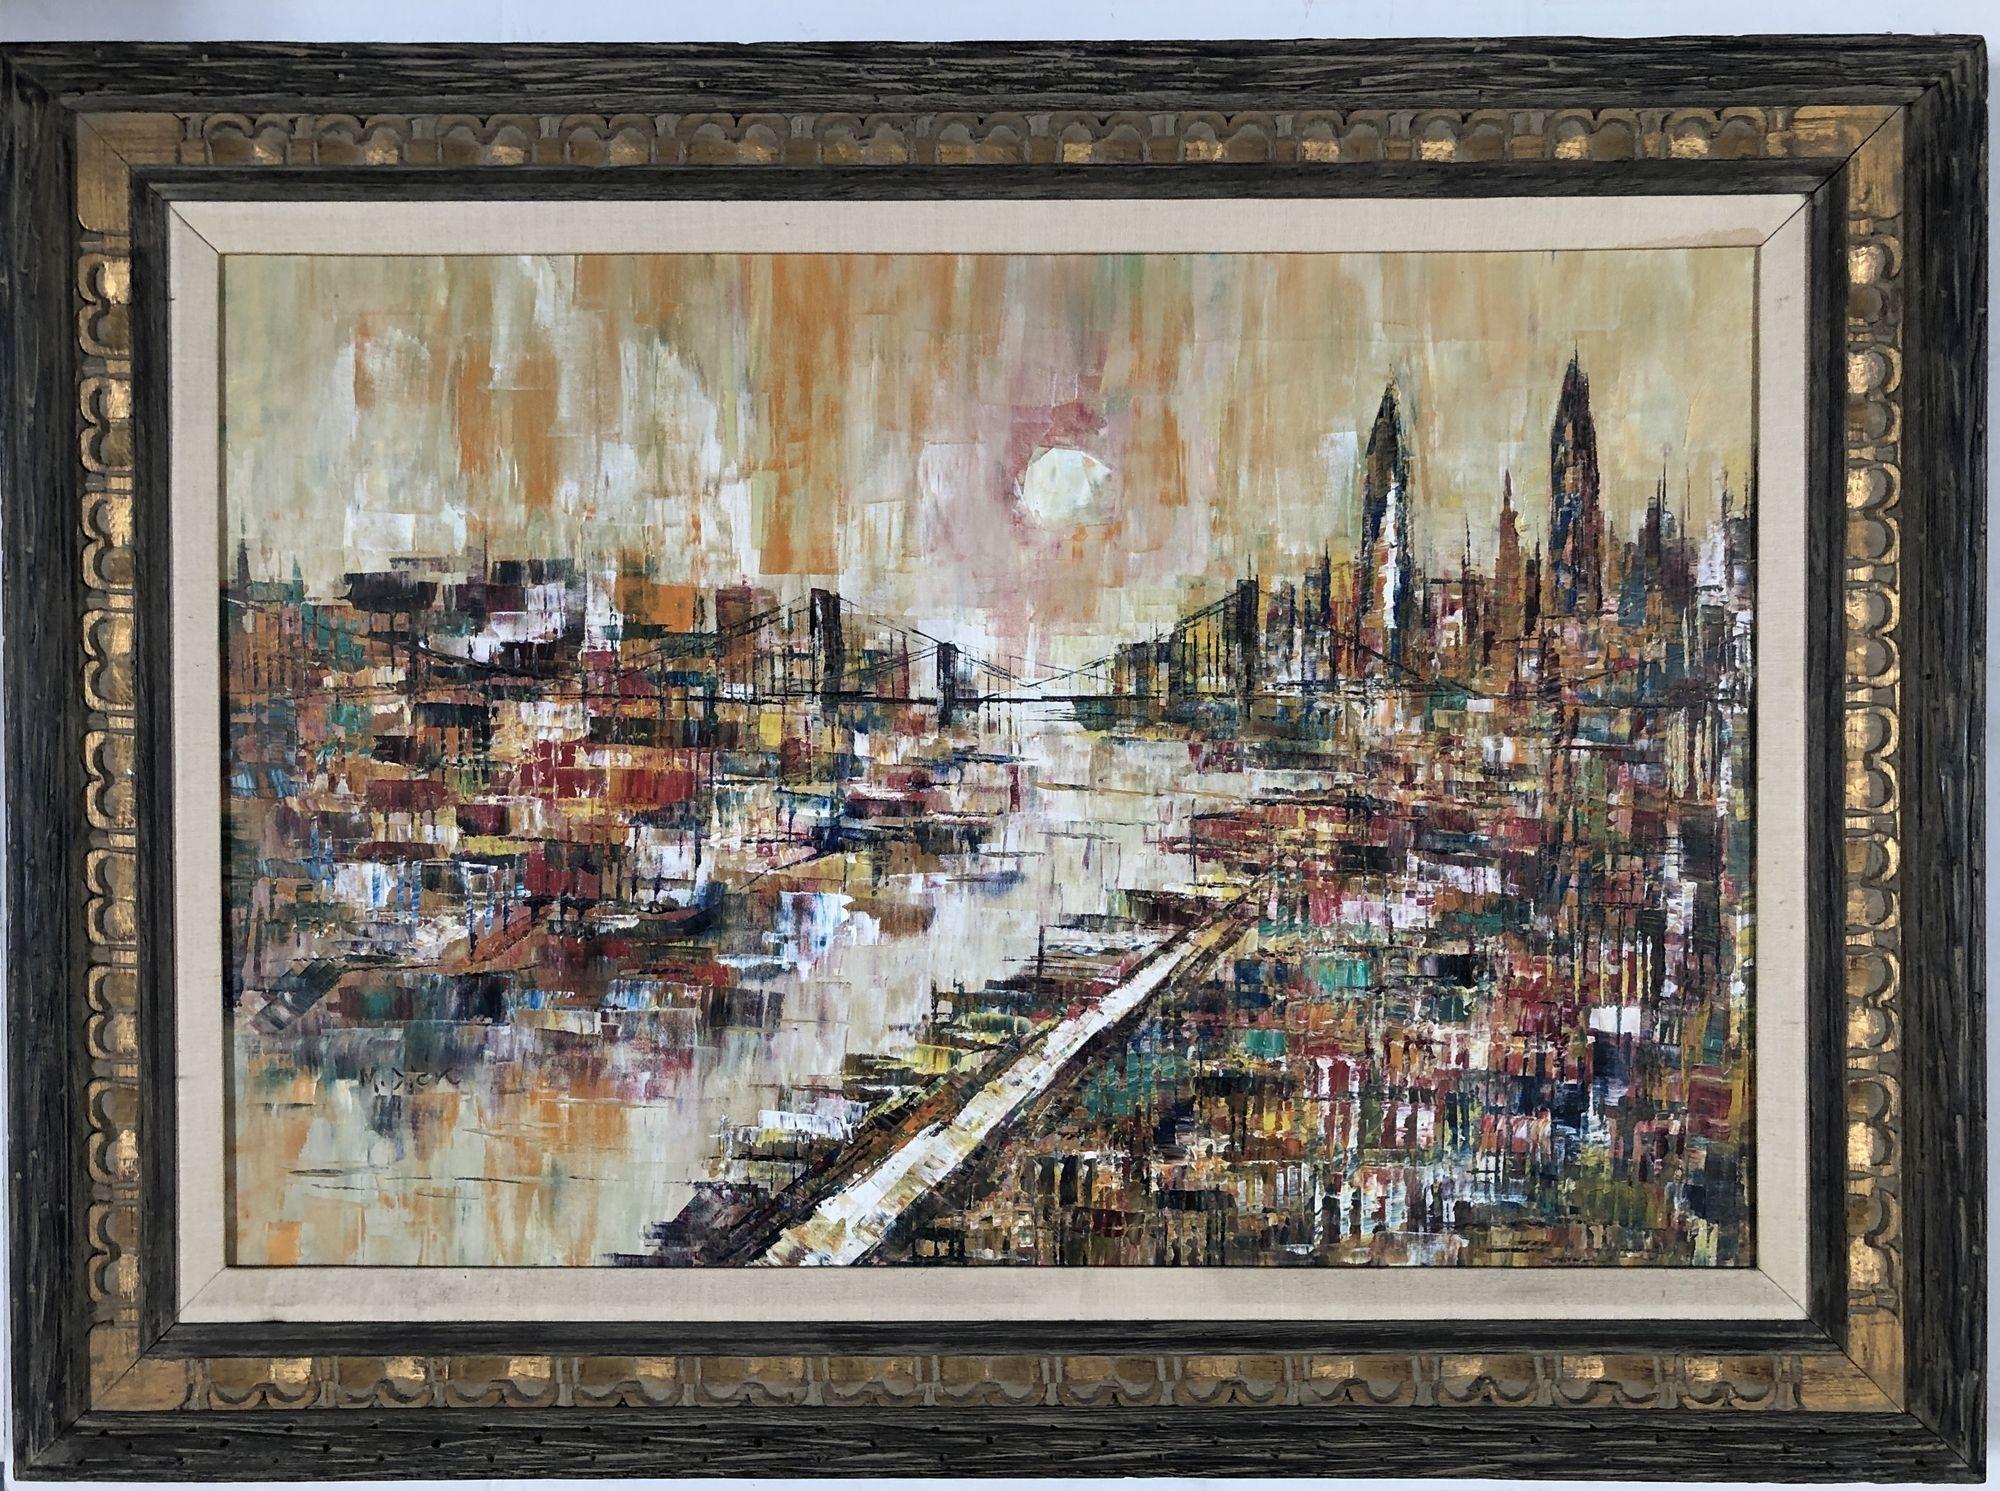 Framed Mid-Century Oil Painting of Bridge and Cityscape Signed by M. Dick In Excellent Condition For Sale In Van Nuys, CA